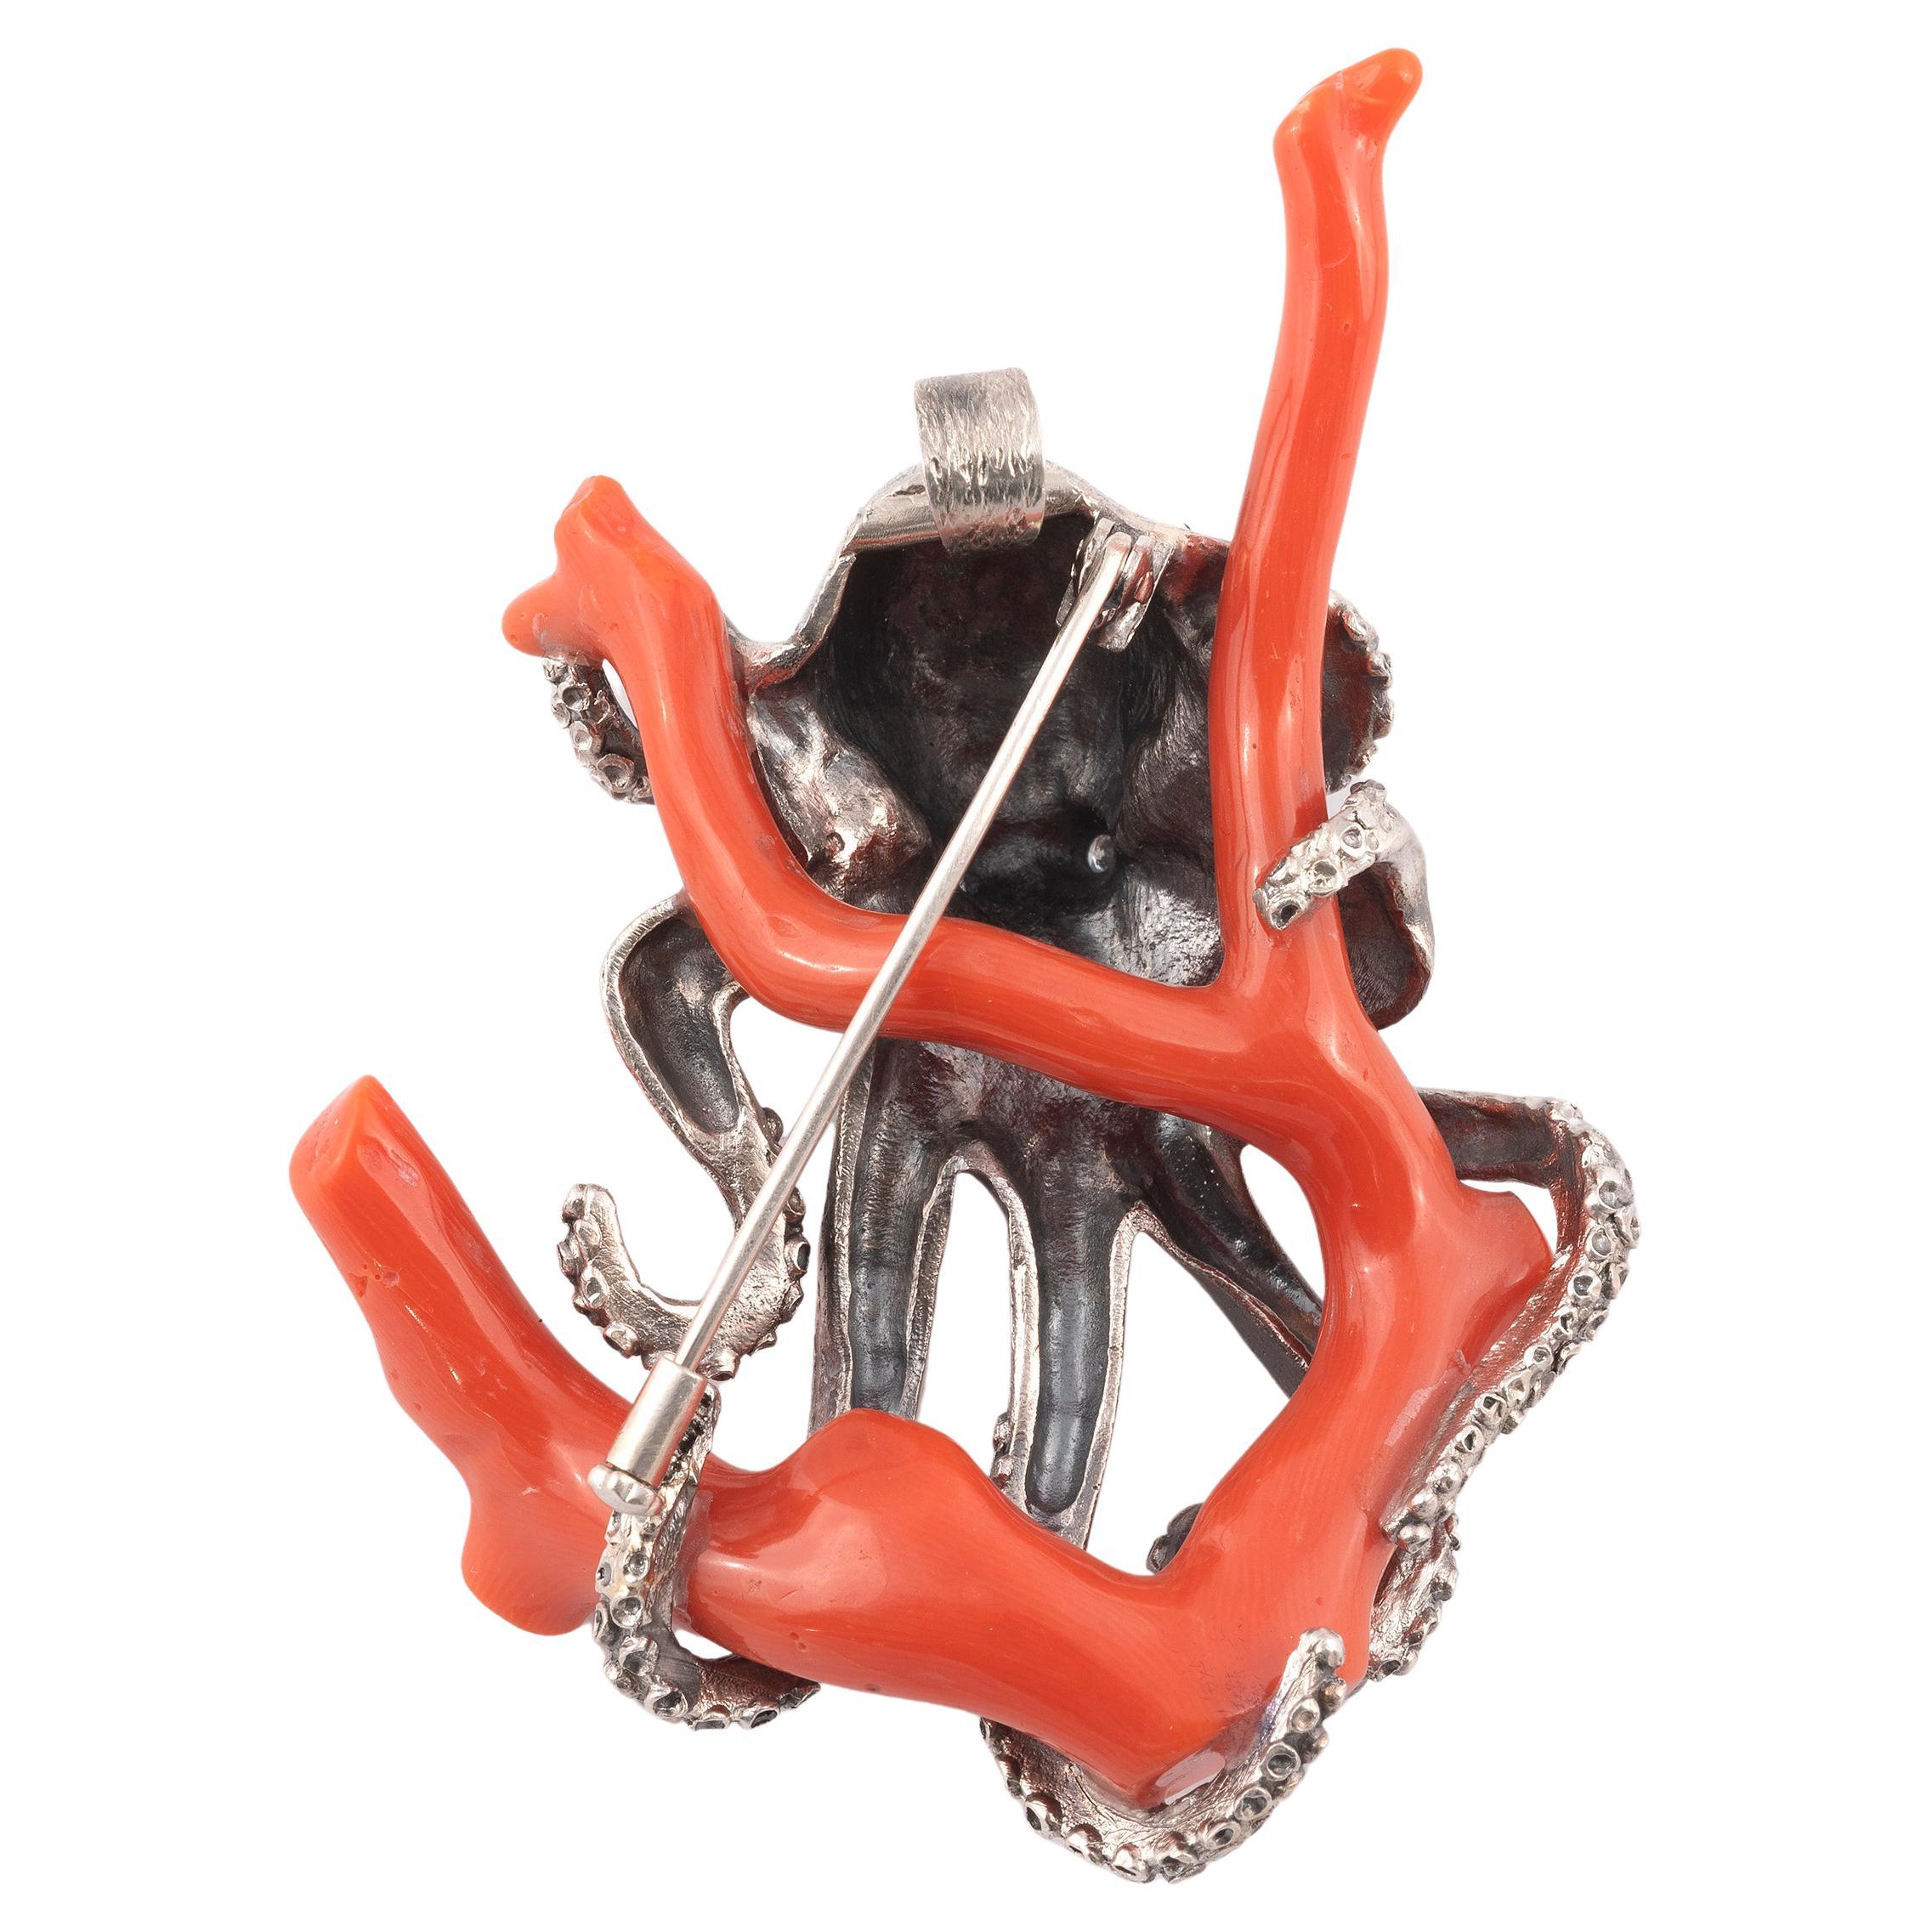 
The octopus eyes set with 2 round diamonds, coiled around a coral branch, mounted in silver.

Lenght 7cm (2.8in)